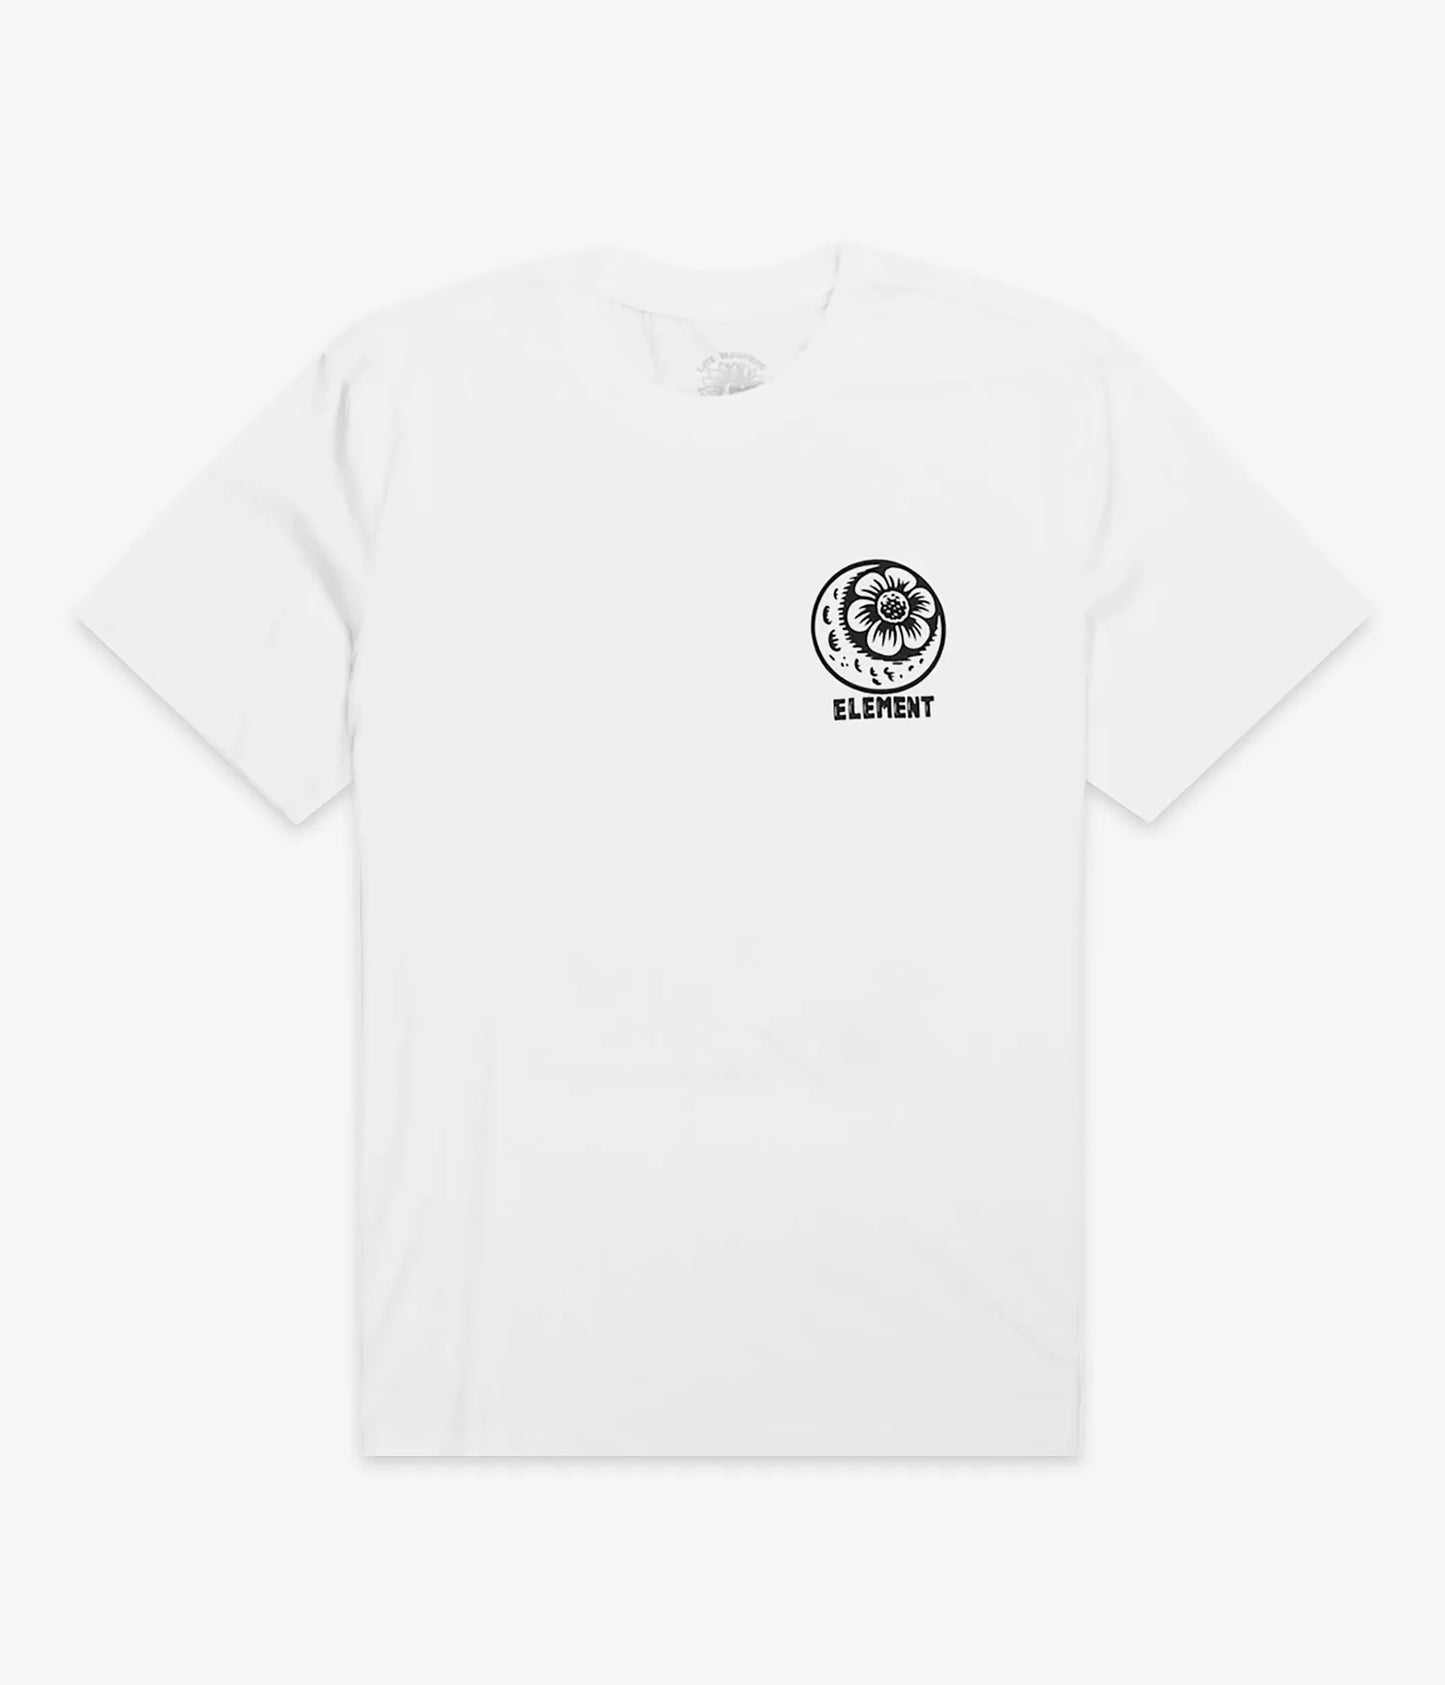 ELEMENT - PROWL TEE YOUTH - OFF WHITE